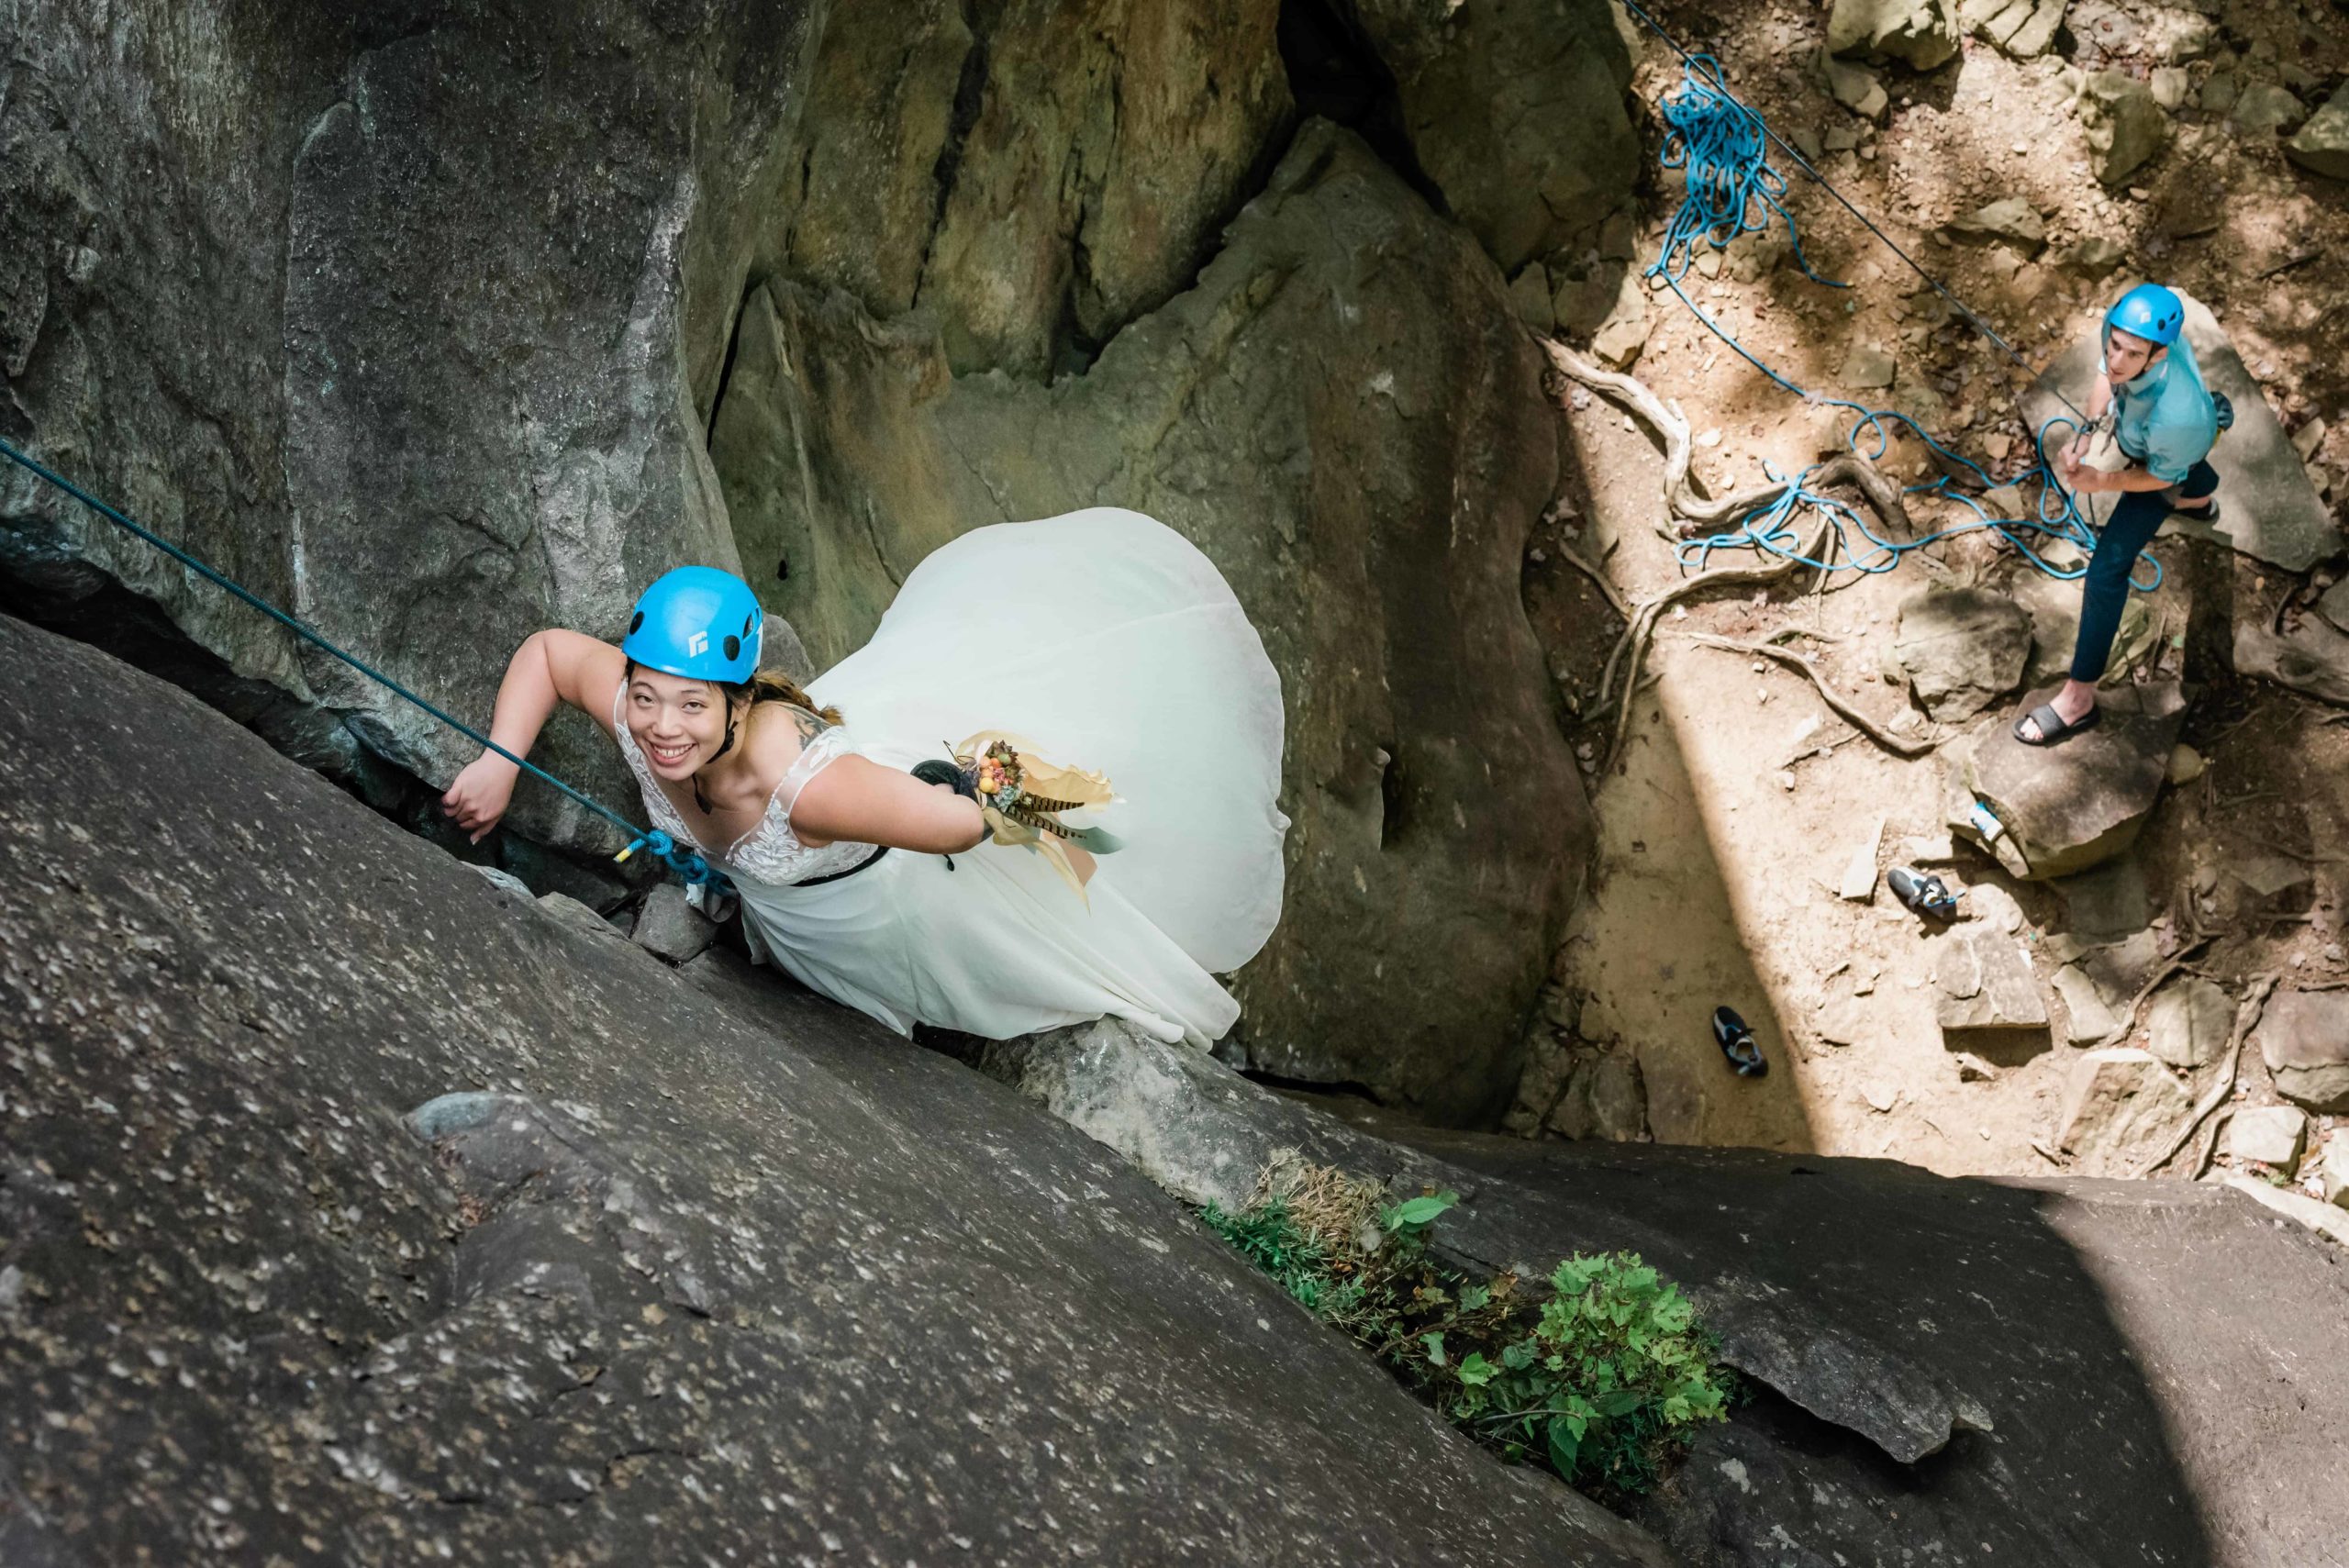 A rock climbing bride in a New River Gorge elopement smiles up at the camera. The groom is visible below her as he runs the climbing rope for safety.